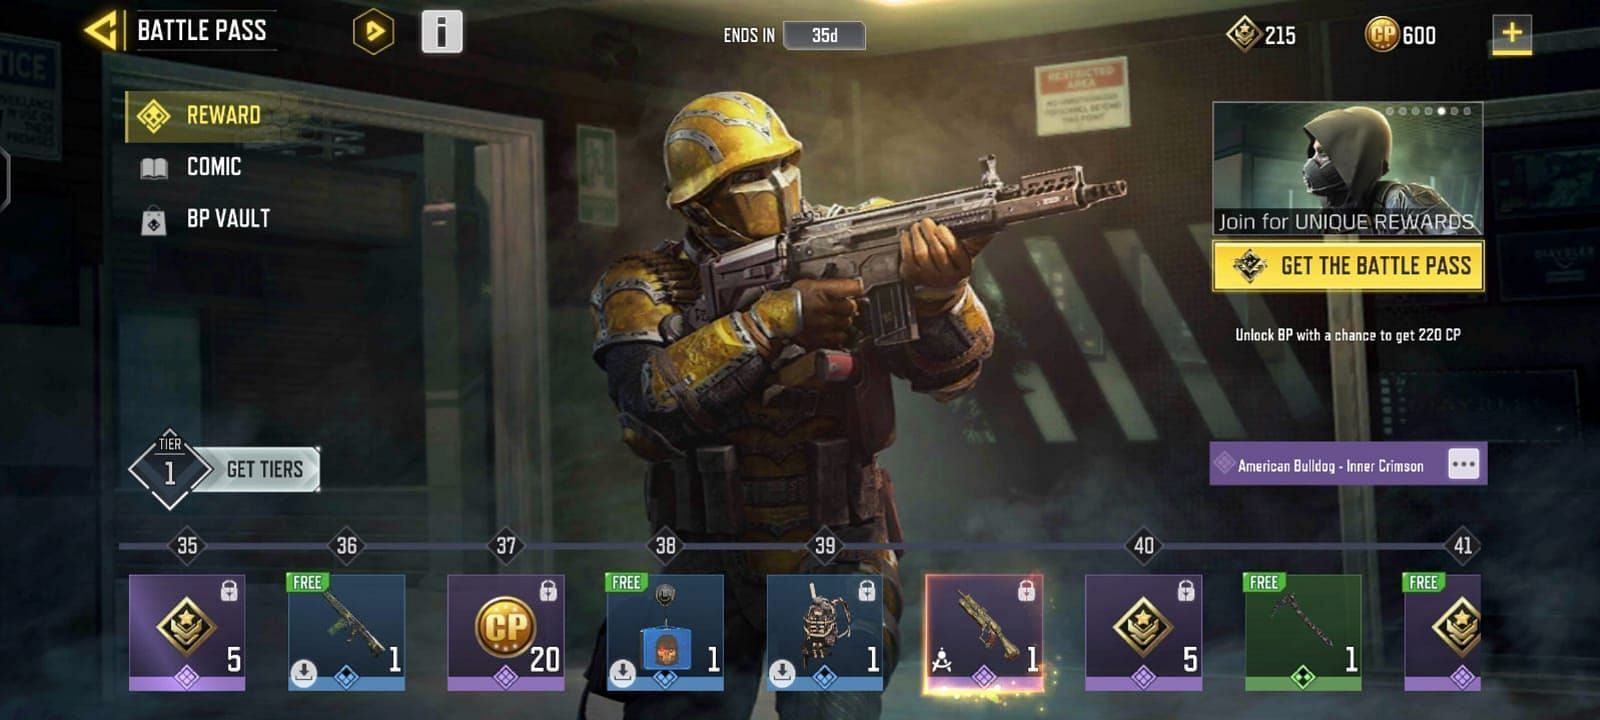 Call of Duty Mobile Season 4: Veiled Uprising Battle Pass rewards between Tier 31 to 40 (Image via Activision)